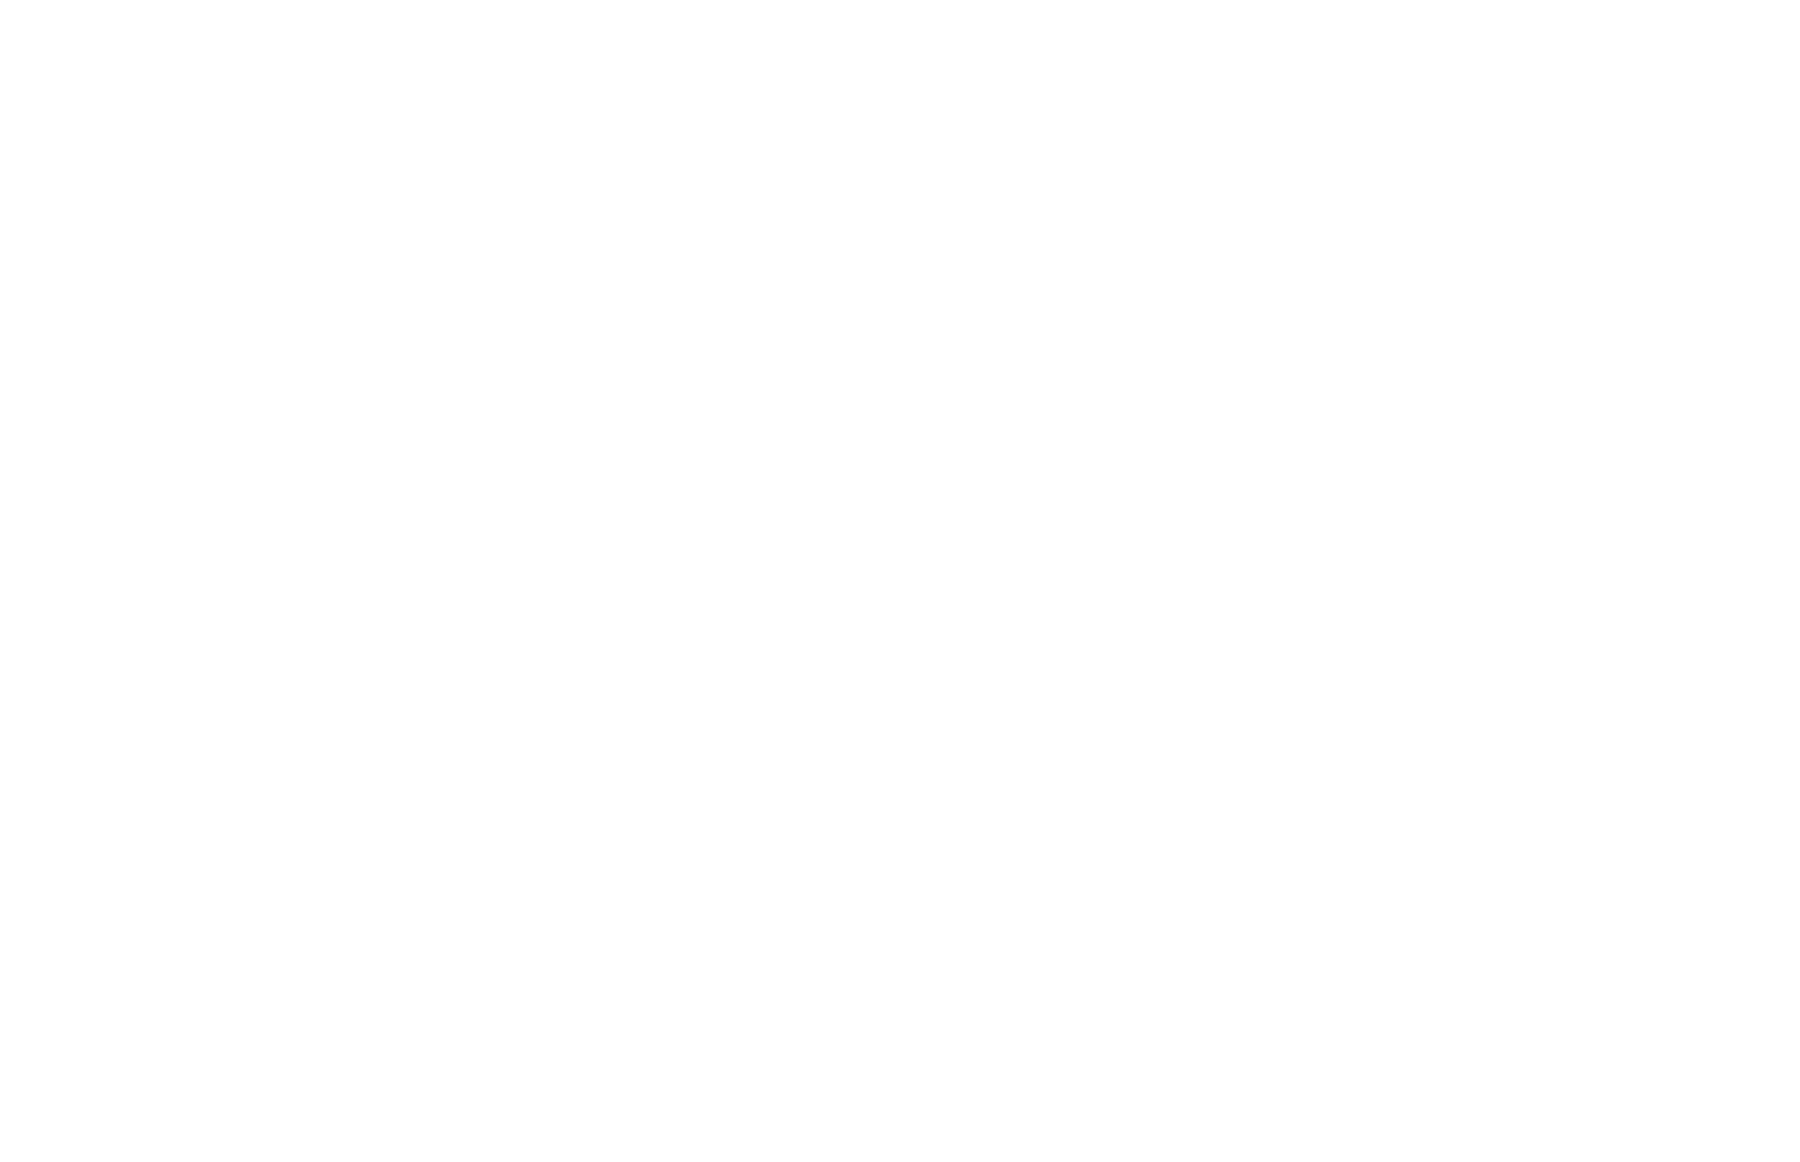 The Bad Apple title